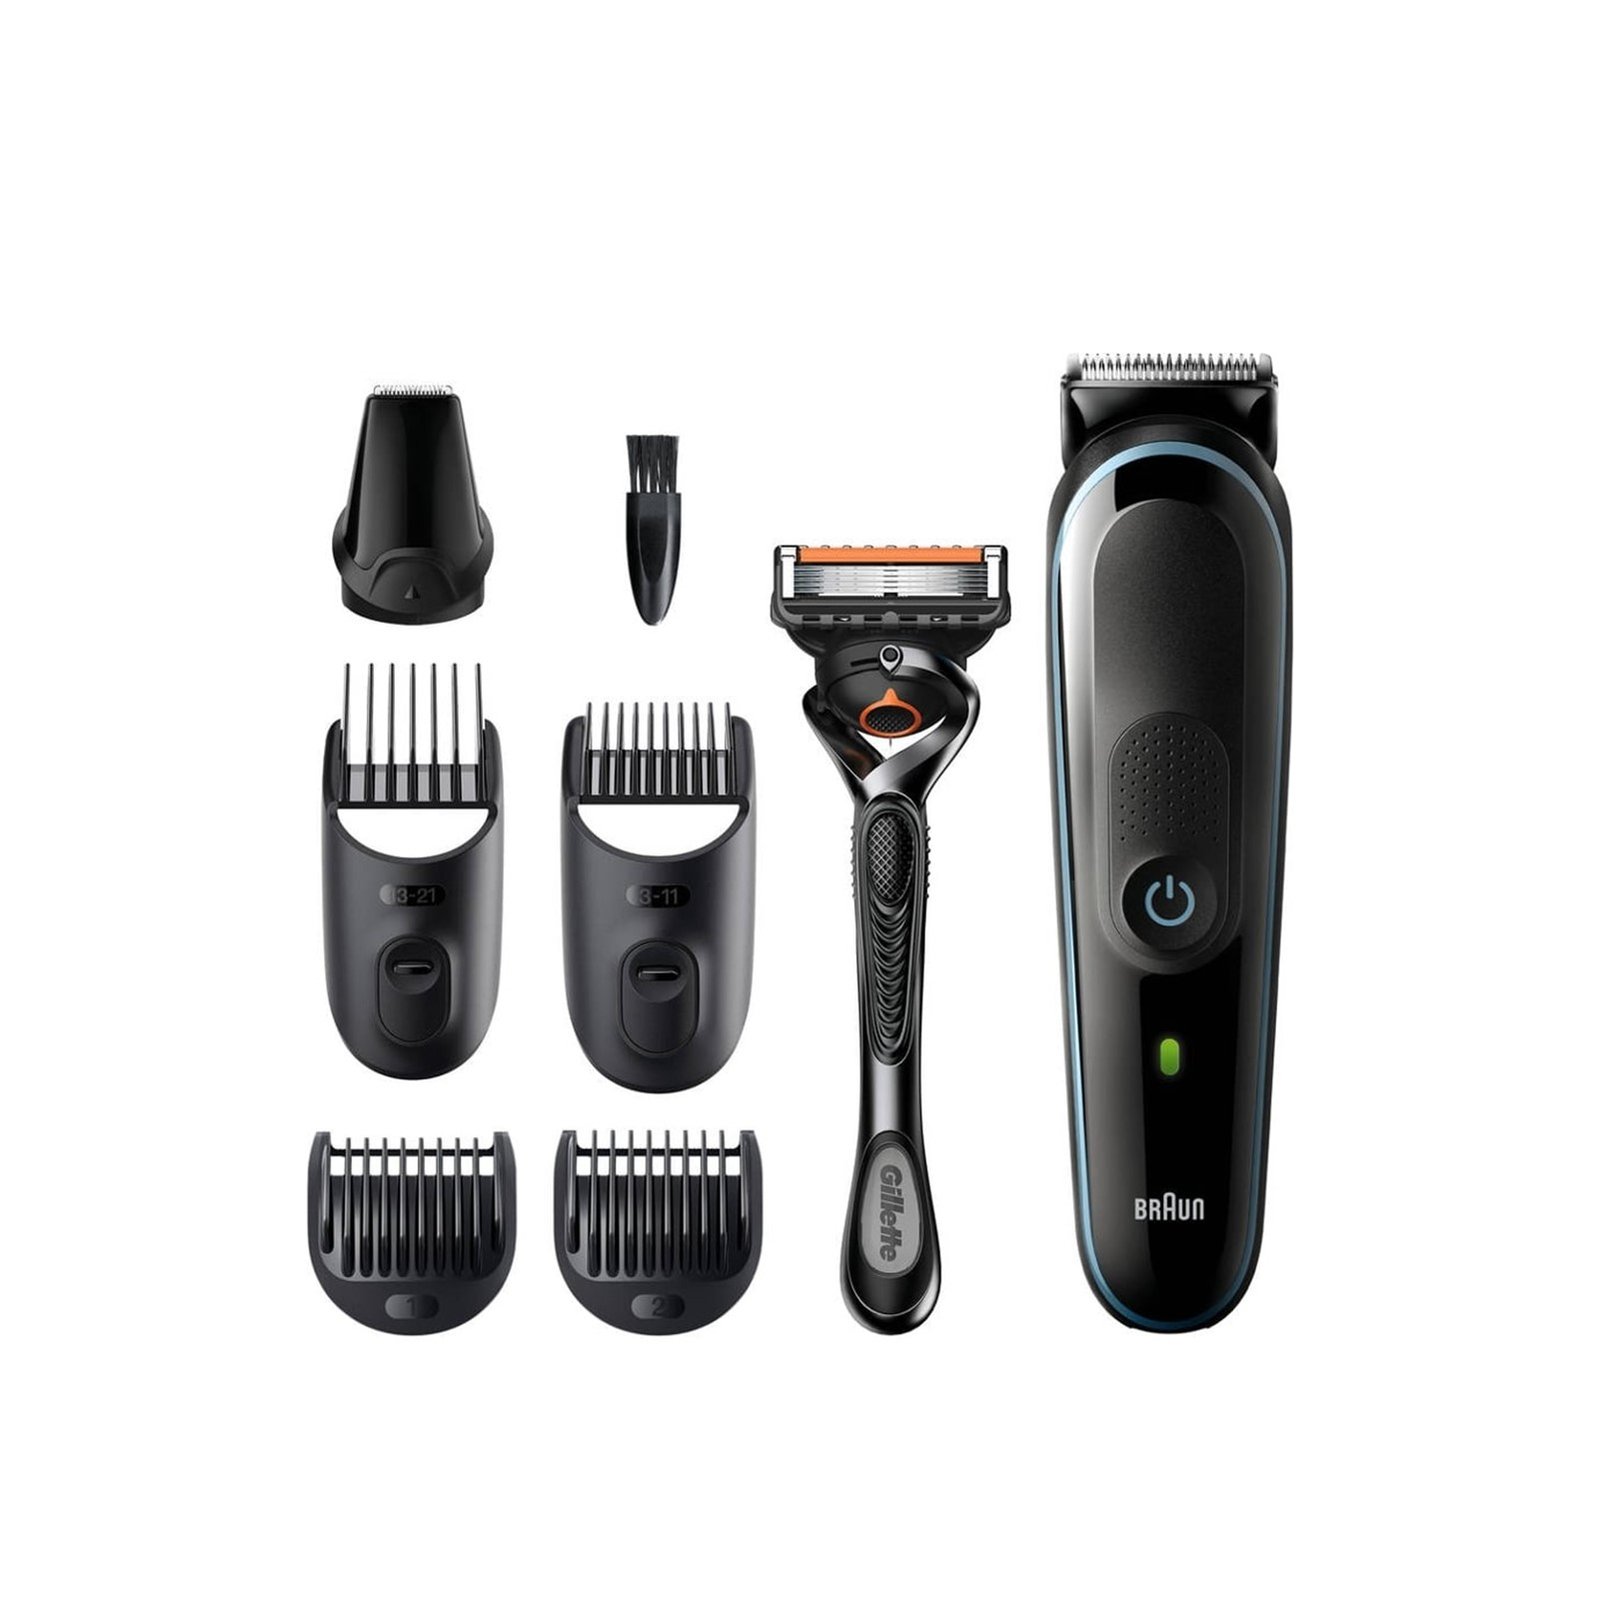 https://static.beautytocare.com/cdn-cgi/image/width=1600,height=1600,f=auto/media/catalog/product//b/r/braun-all-in-one-trimmer-3-styling-kit-mgk3345.jpg